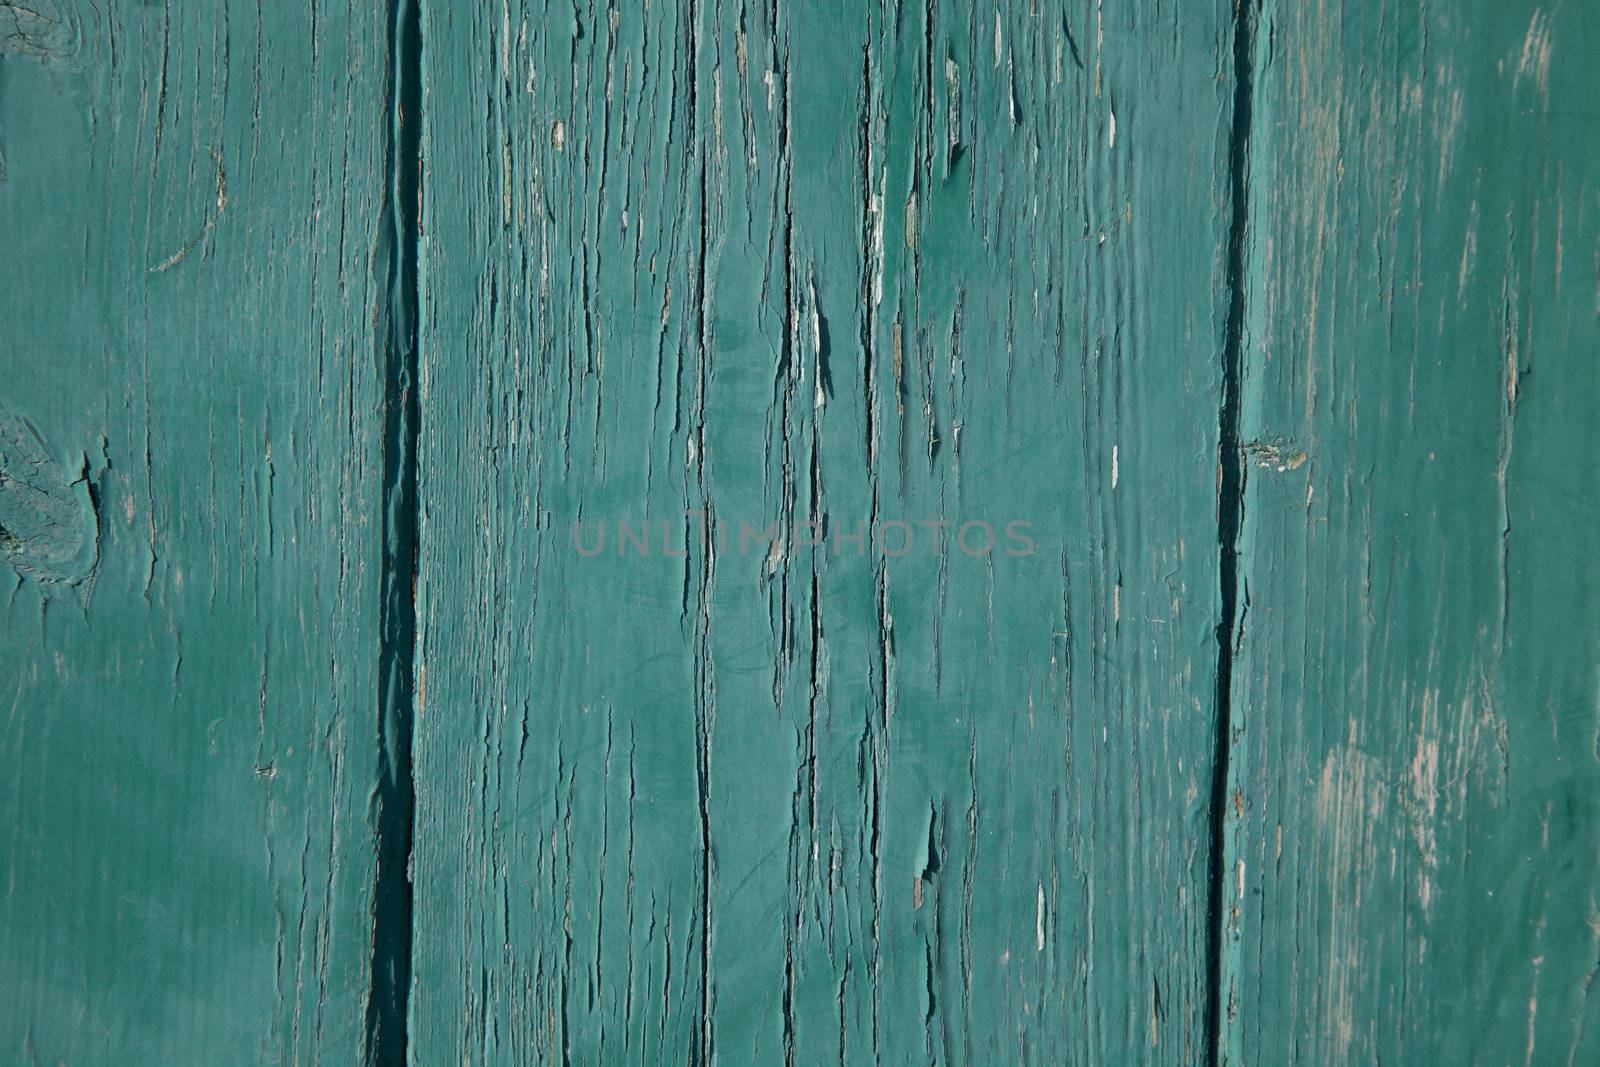 Vertical wooden planks with grain painted green with a worn flaky look.